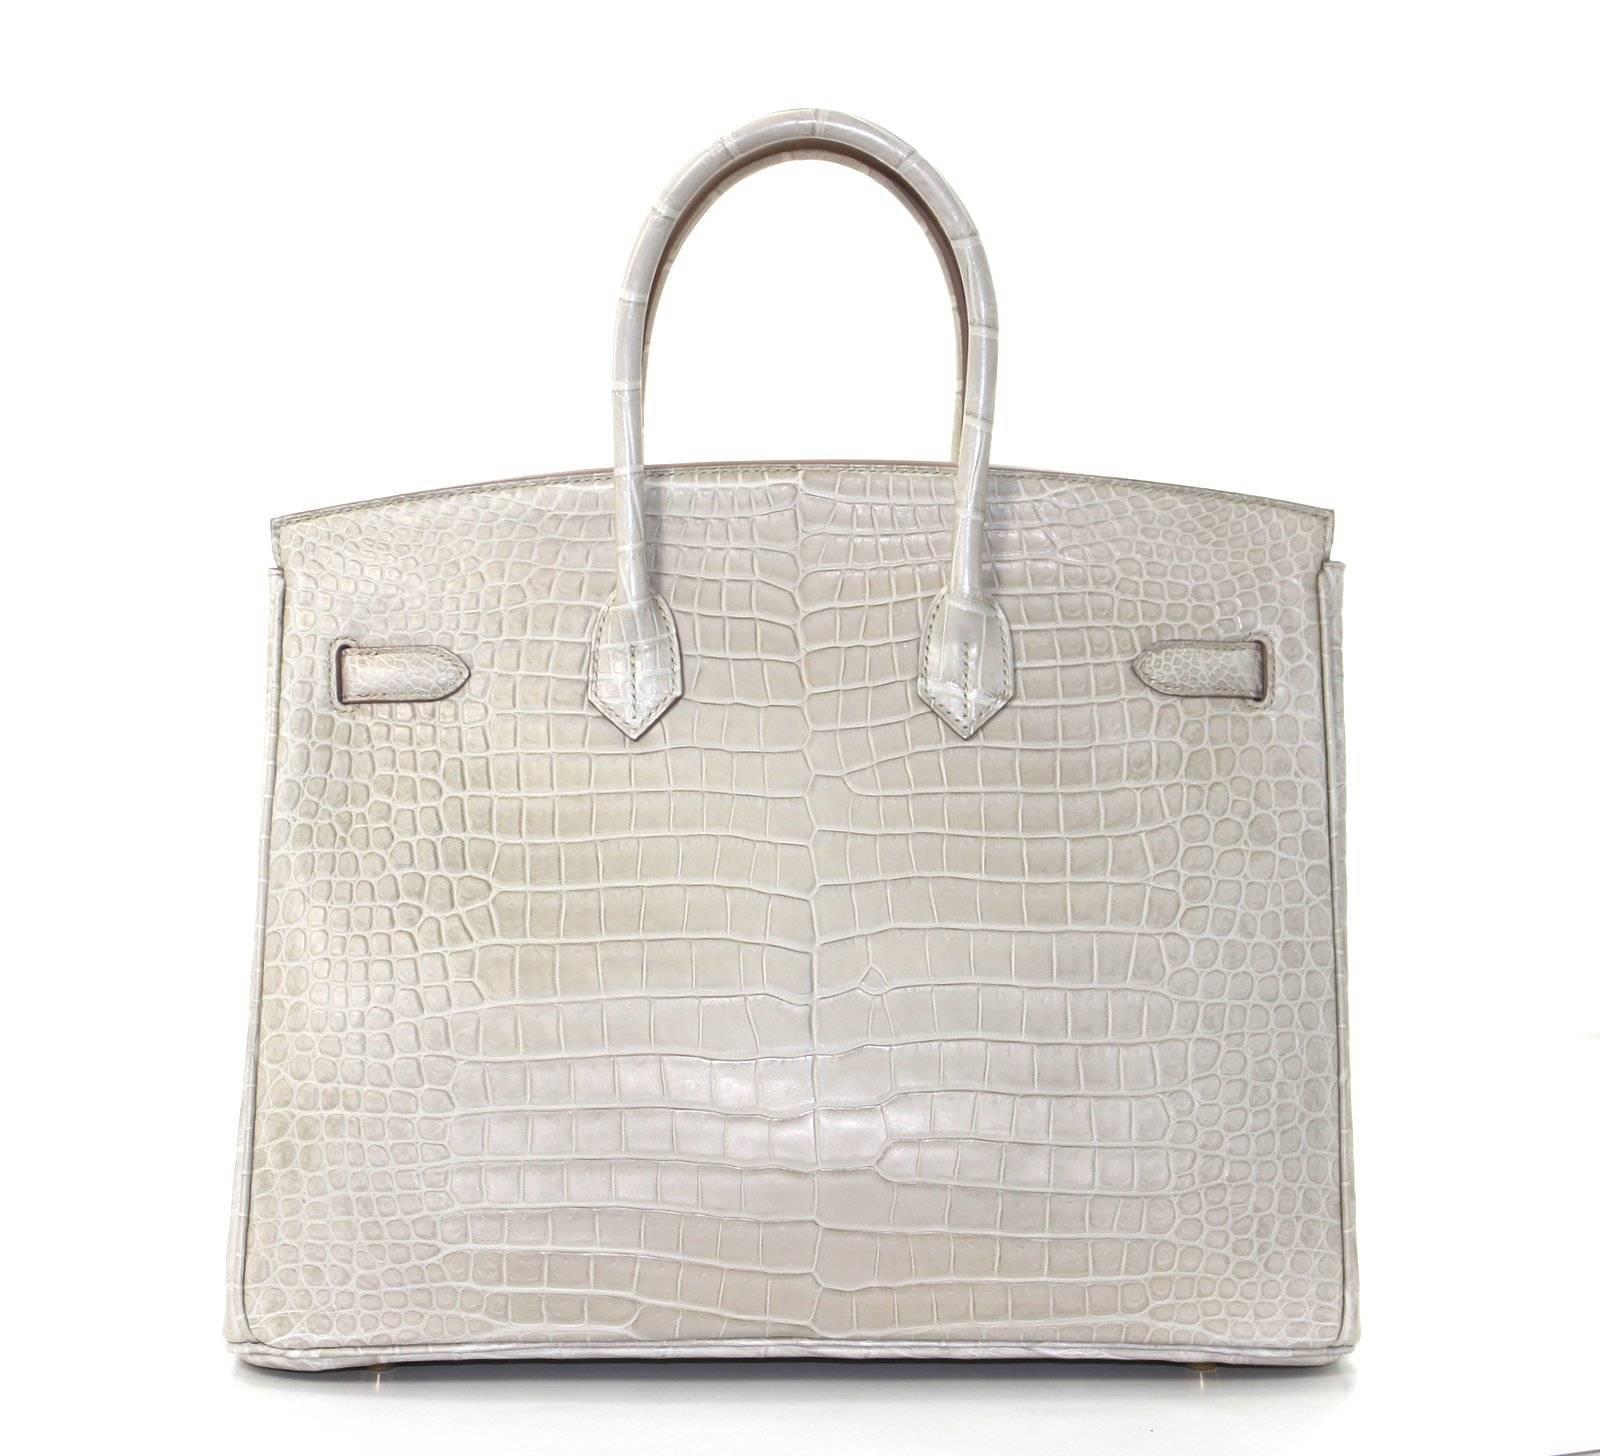 Pristine, store fresh condition (plastic on hardware) Hermès Birkin Bag in BETON Matte Porosus Crocodile, GHW 35 cm, T stamp

Crafted by hand and considered by many as the epitome of luxury items, Birkins are in extremely high demand but very